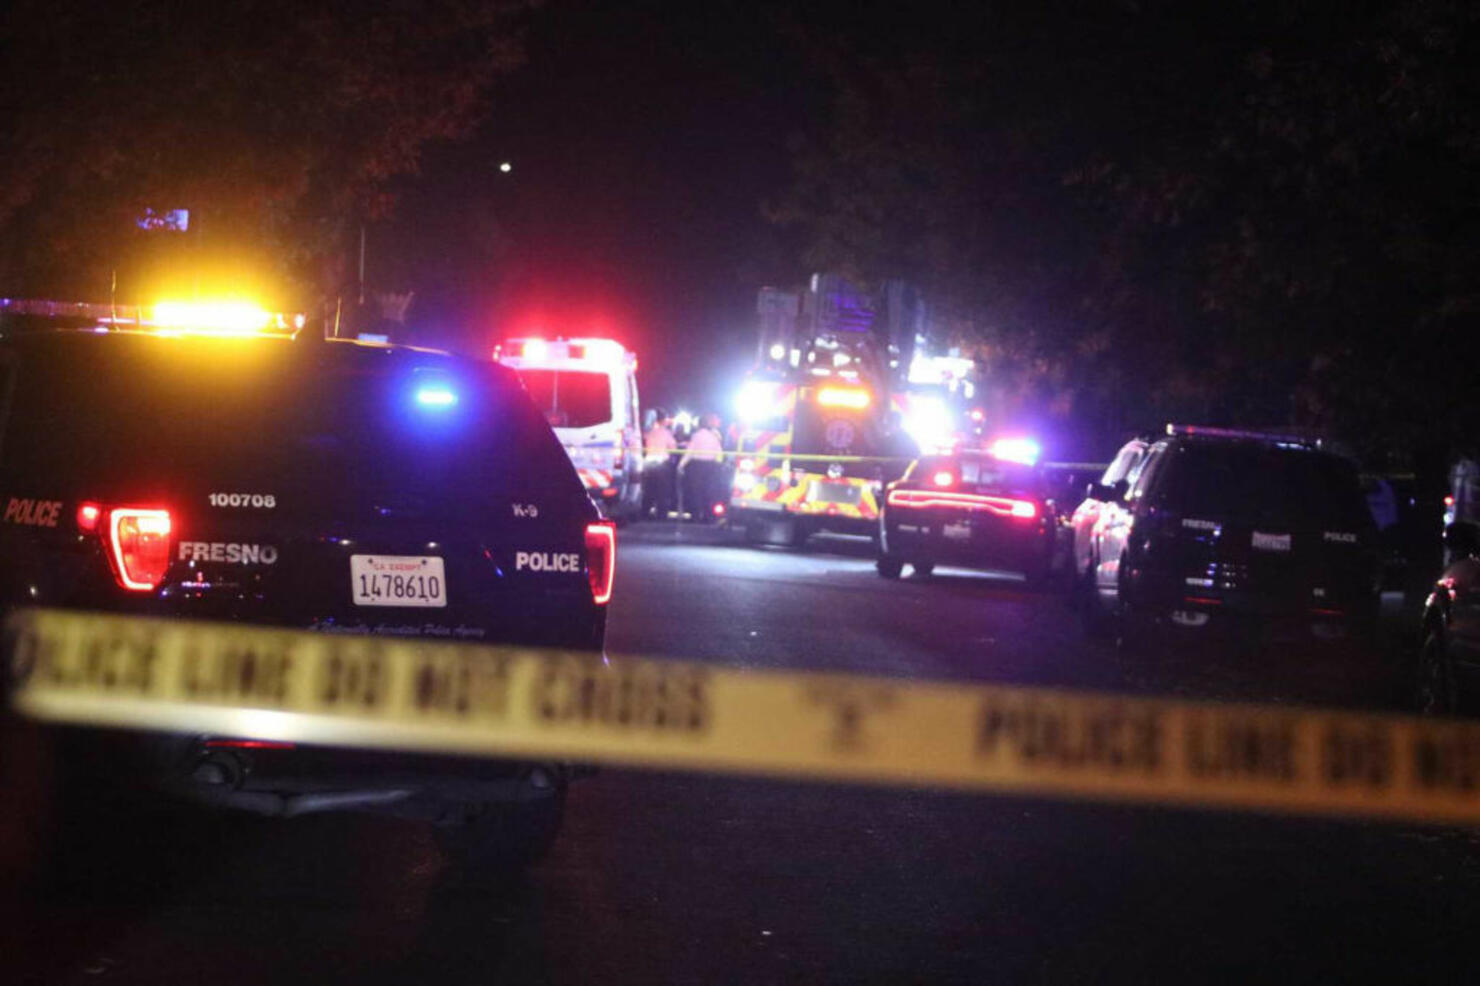 At least 9 wounded in 'mass casualty shooting' in southeast Fresno, police say